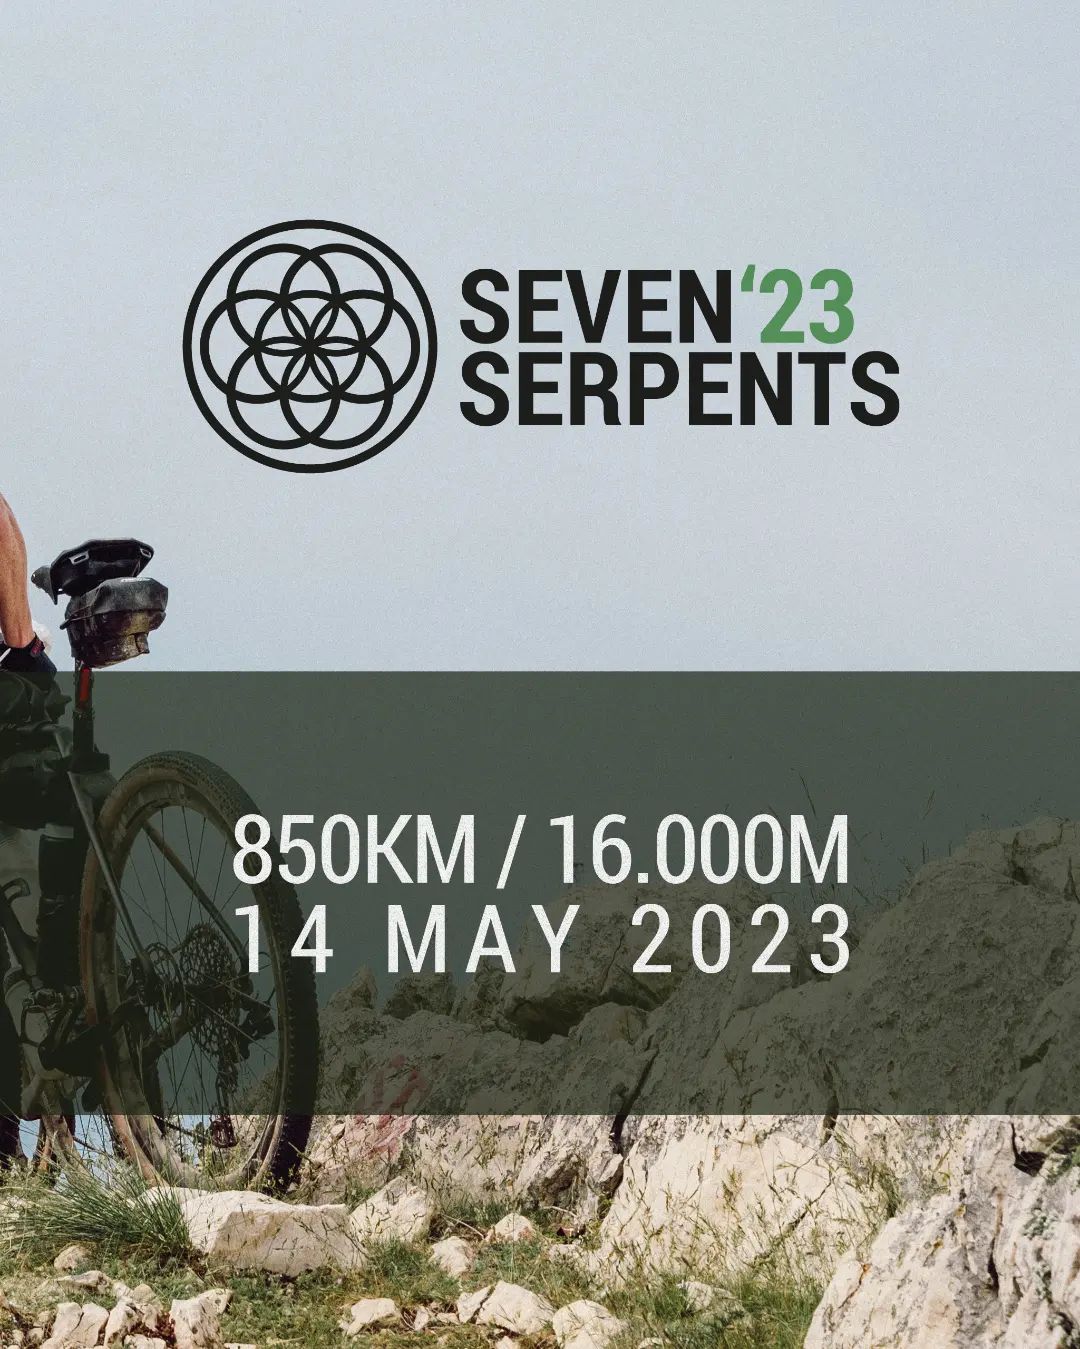 Seven Serpents 2023 is waiting for you! We're working hard to make it happen but we already know that it will be a blast! 💥🚀⚡

With some tiny changes the route will be even nicer, more intense and of course quite challenging! 👀👌🤯

Once again this will be a huge but rewarding experience meant for people who like to overcome their limits!

You want to discover new places on incredibly wild sceneries? You feel like starting the season with a big challenge in order to be prepared for your next adventures?

Then keep this in mind:
▪️Ljubljana to Trieste; 14th May 2023
▪️850km / 16.000m through some of the most stunning sceneries of Slovenia, Croatia and Italy 🇸🇮🇭🇷🇮🇹

Registrations opening wednesday October 19th! With the support of @fmchallenge 🖤

.
.
.

#serpentsarerising #sevenserpentsgravel #7SG2023 #quickbite #wiliertriestina #raisethebar #pasol #vivifuori #infini #movinginstyle #bikepacking #bikepackinglife #cyclingadventures #ultracycling #cycling  #gravel #gravelgrinder #ridegravel #outsideisfree #naturelovers #cyclingshots